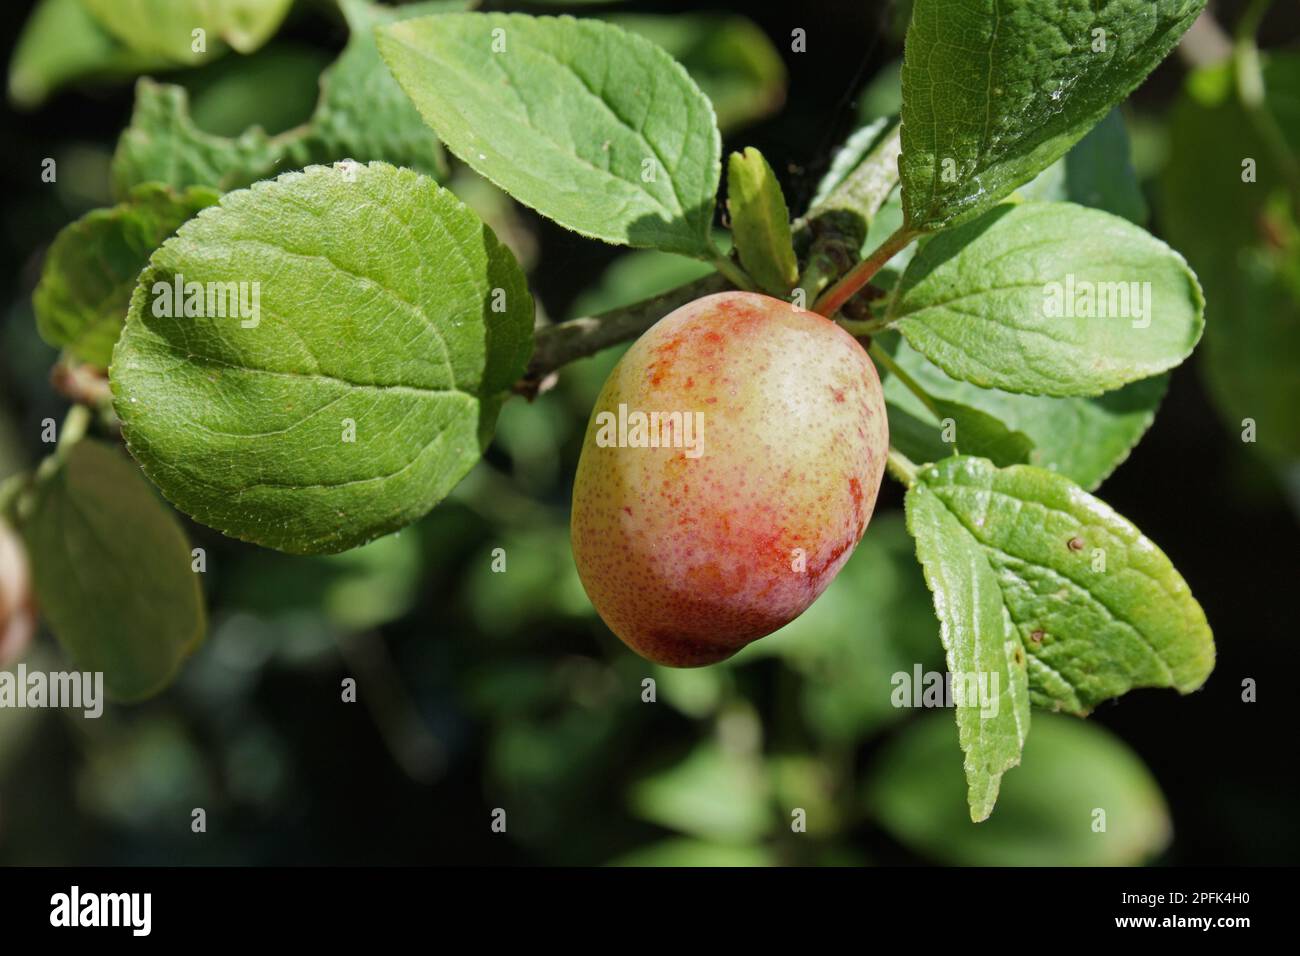 Plum (Prunus domestica) 'Early Laxton', close-up of ripe fruit growing in the garden, Mendlesham, Suffolk, England, United Kingdom Stock Photo